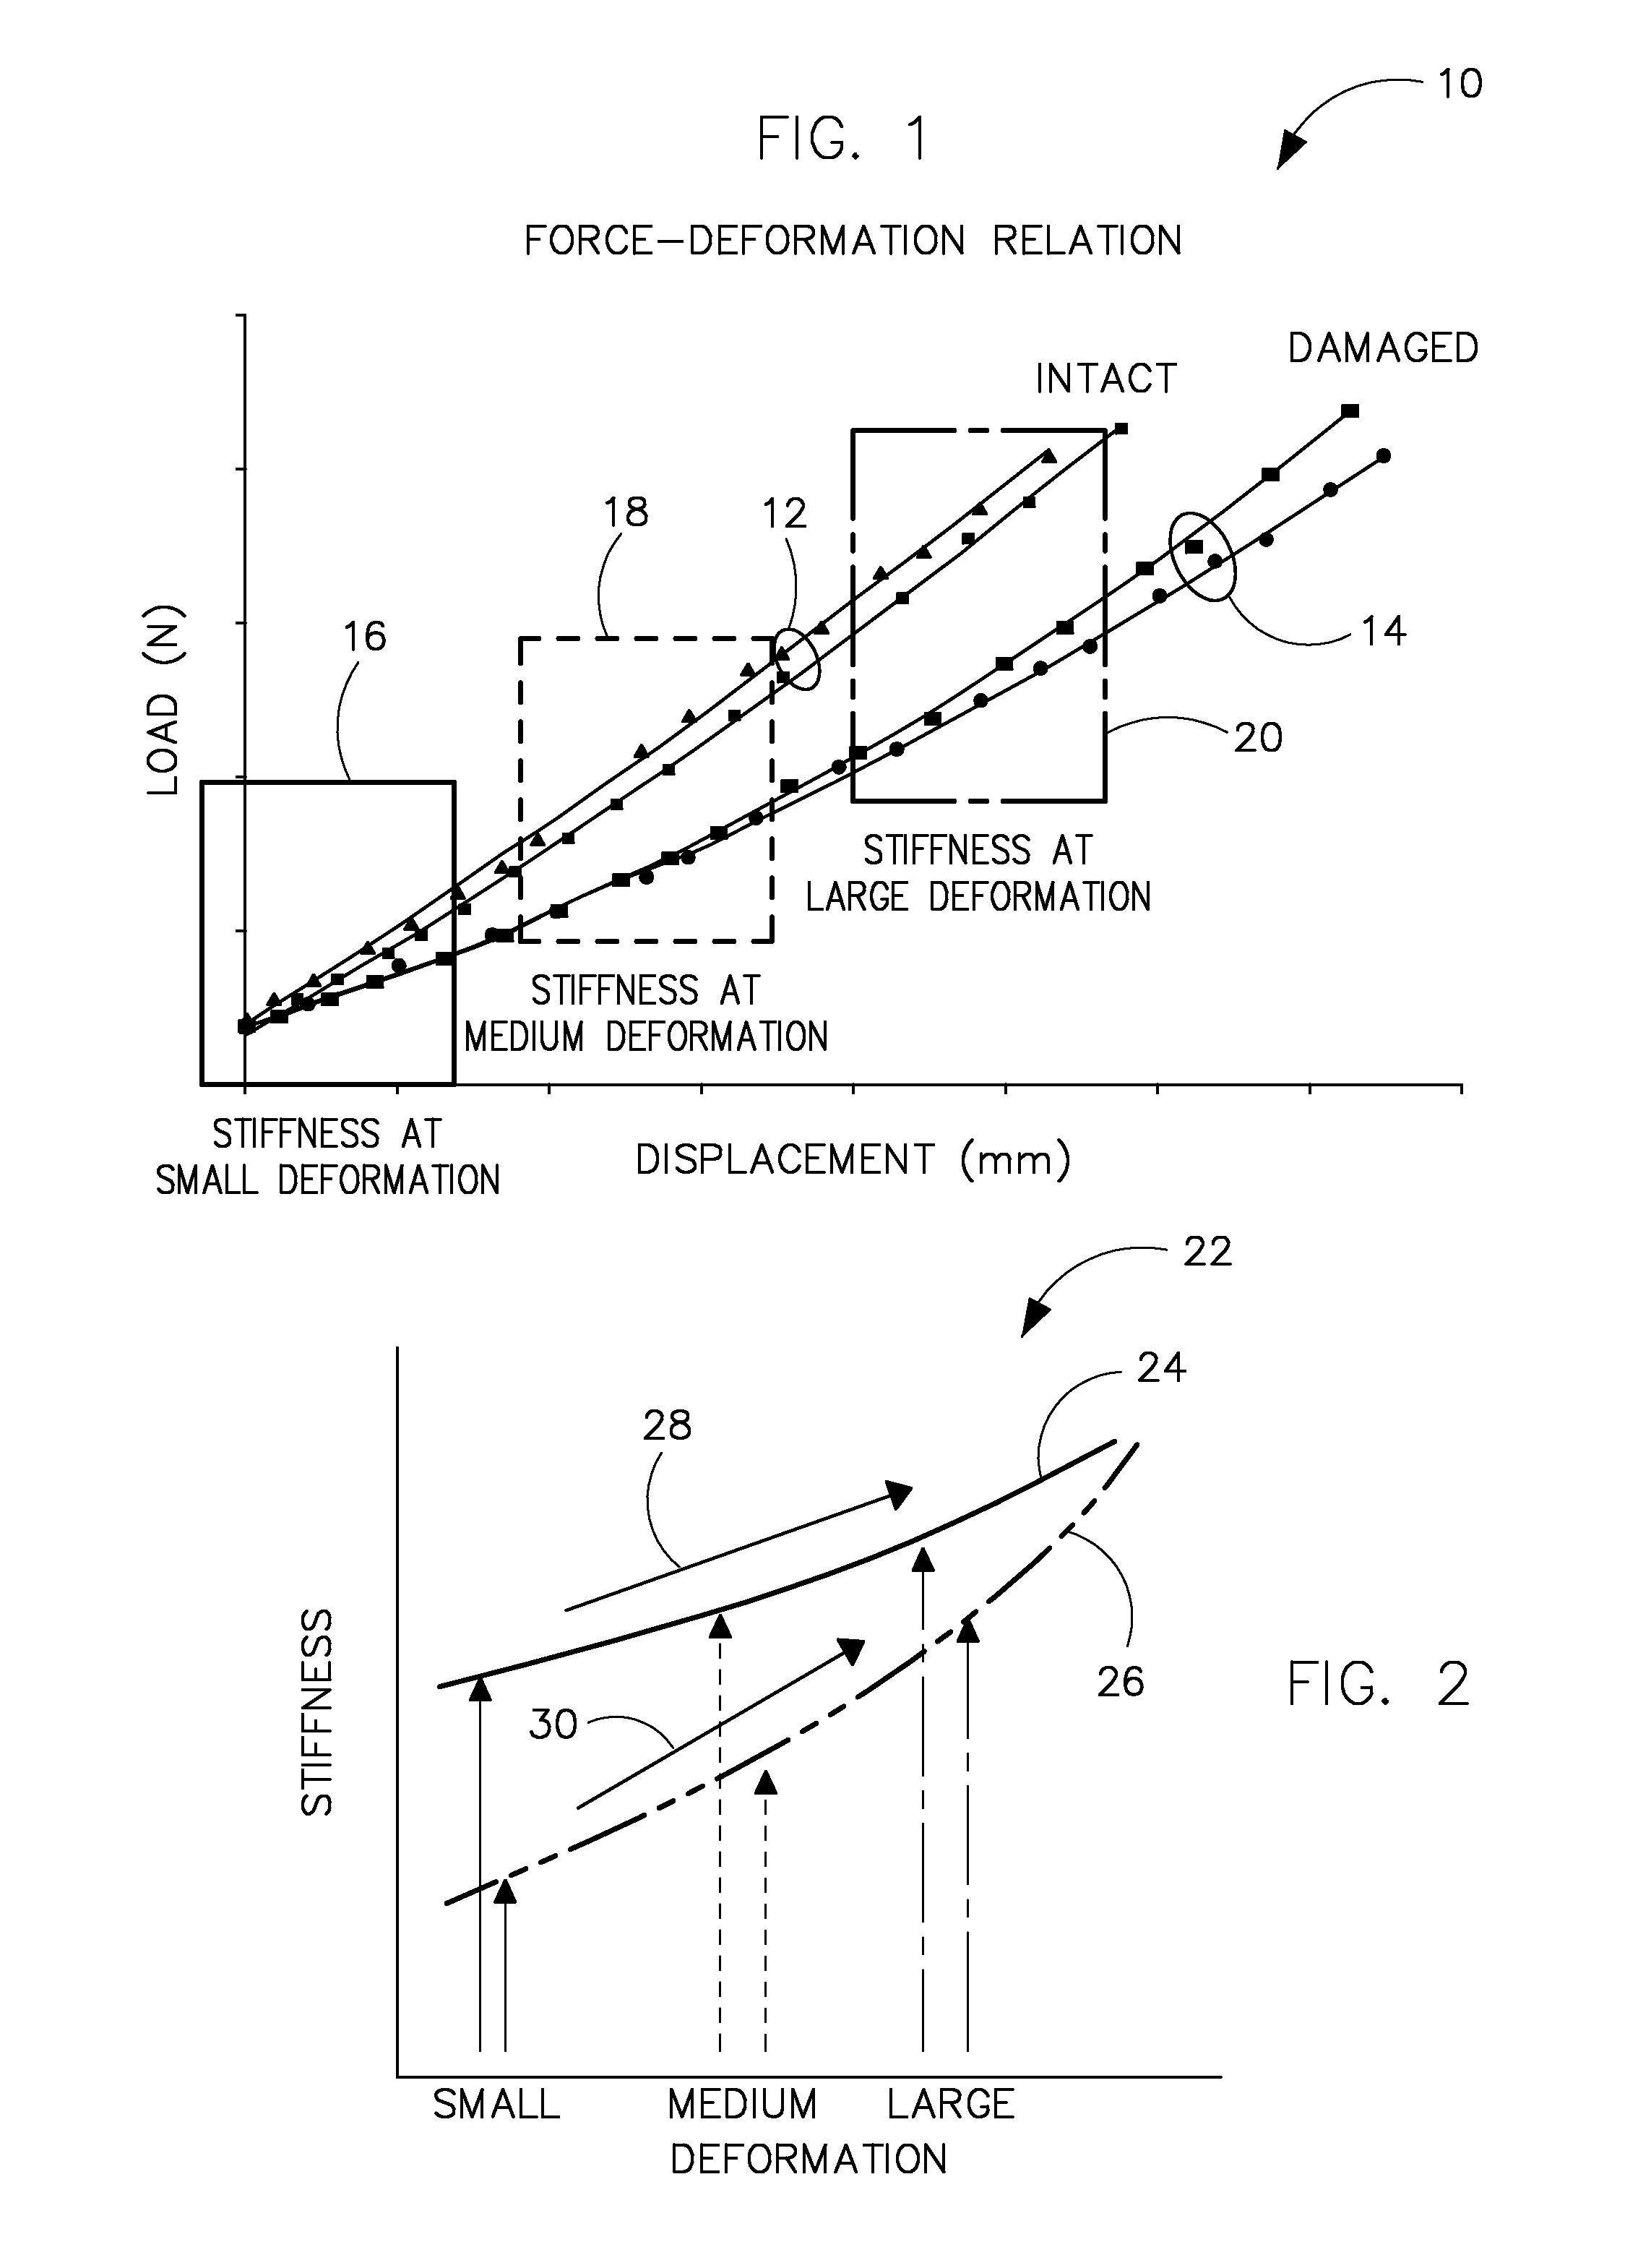 System and method of ultrasound image processing